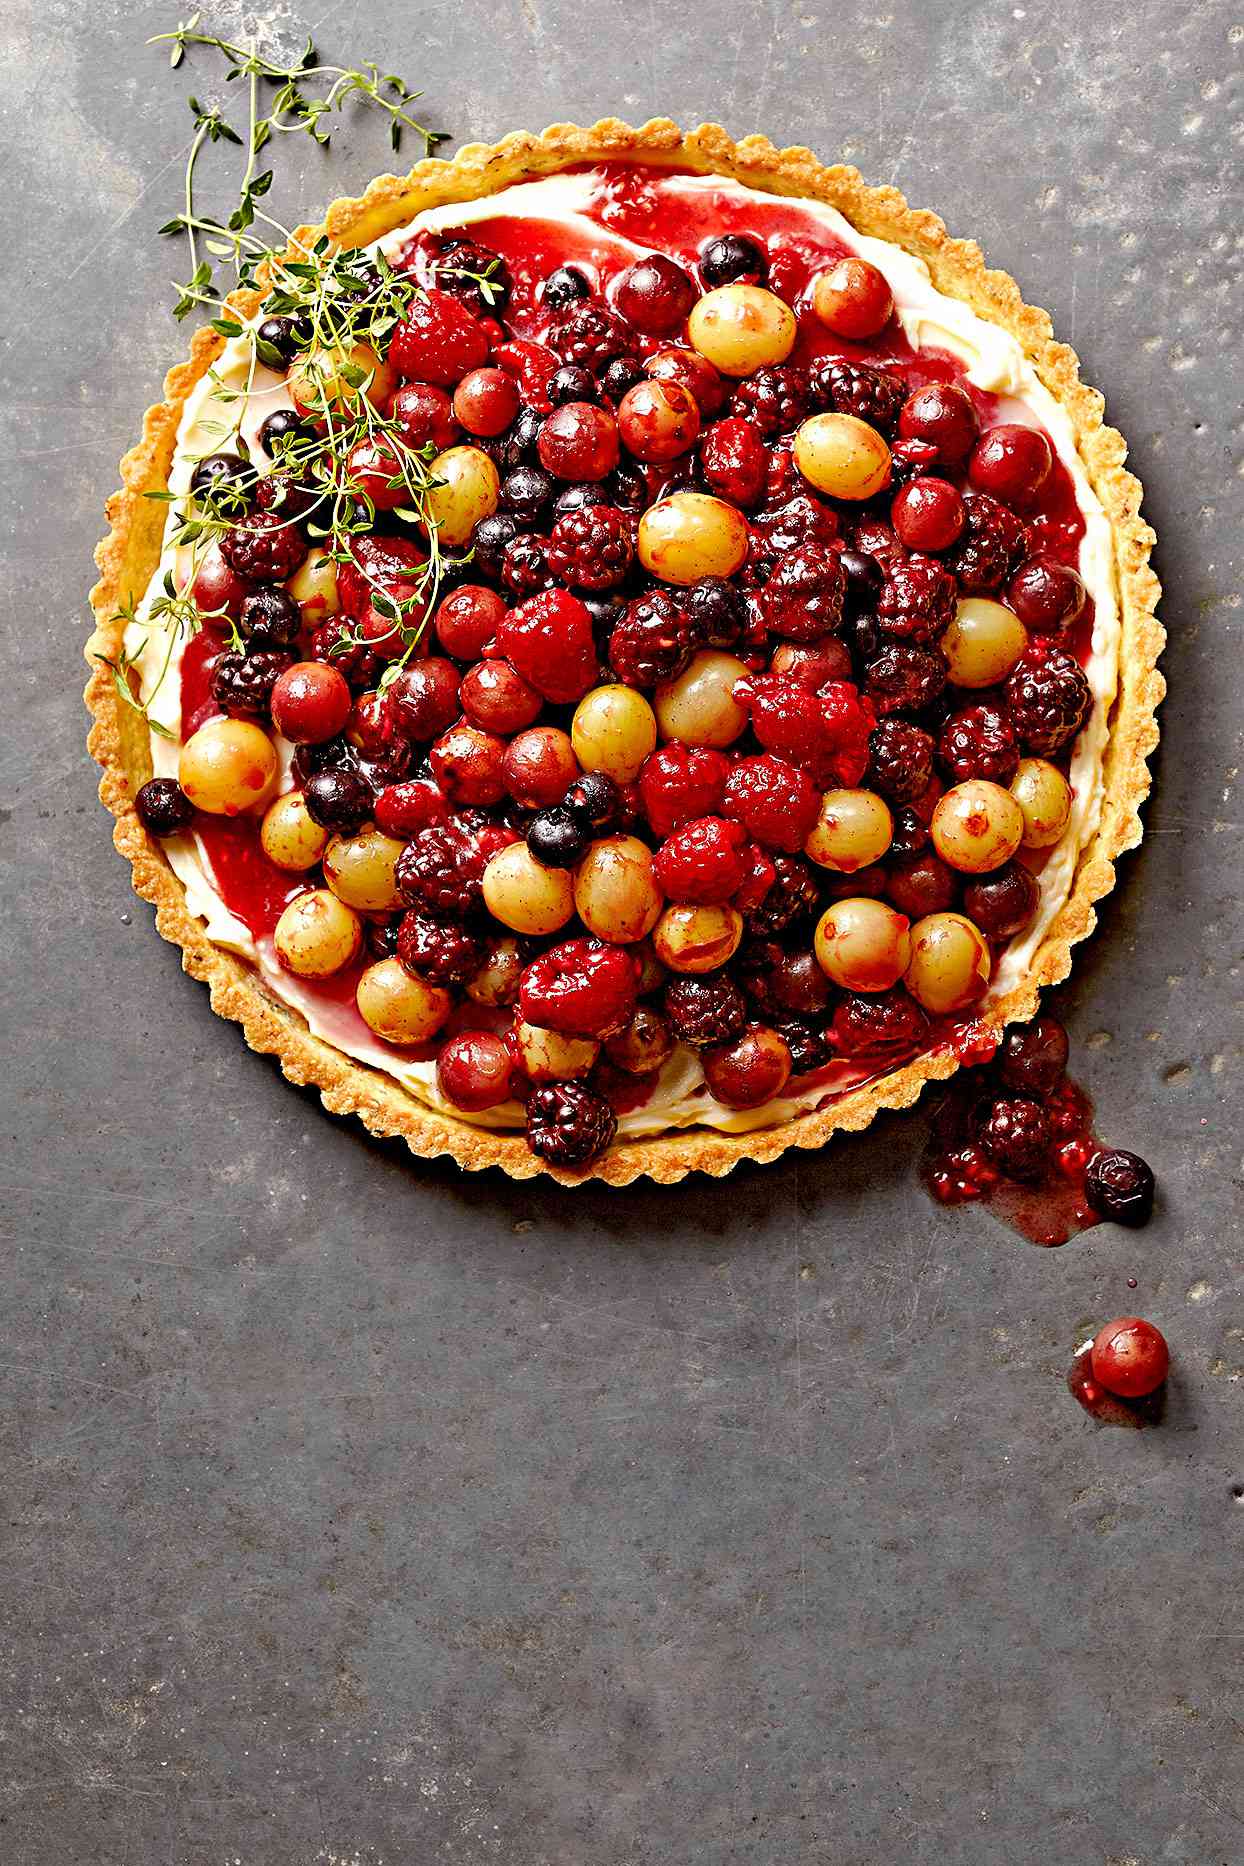 Roasted Berries and Grapes Tart